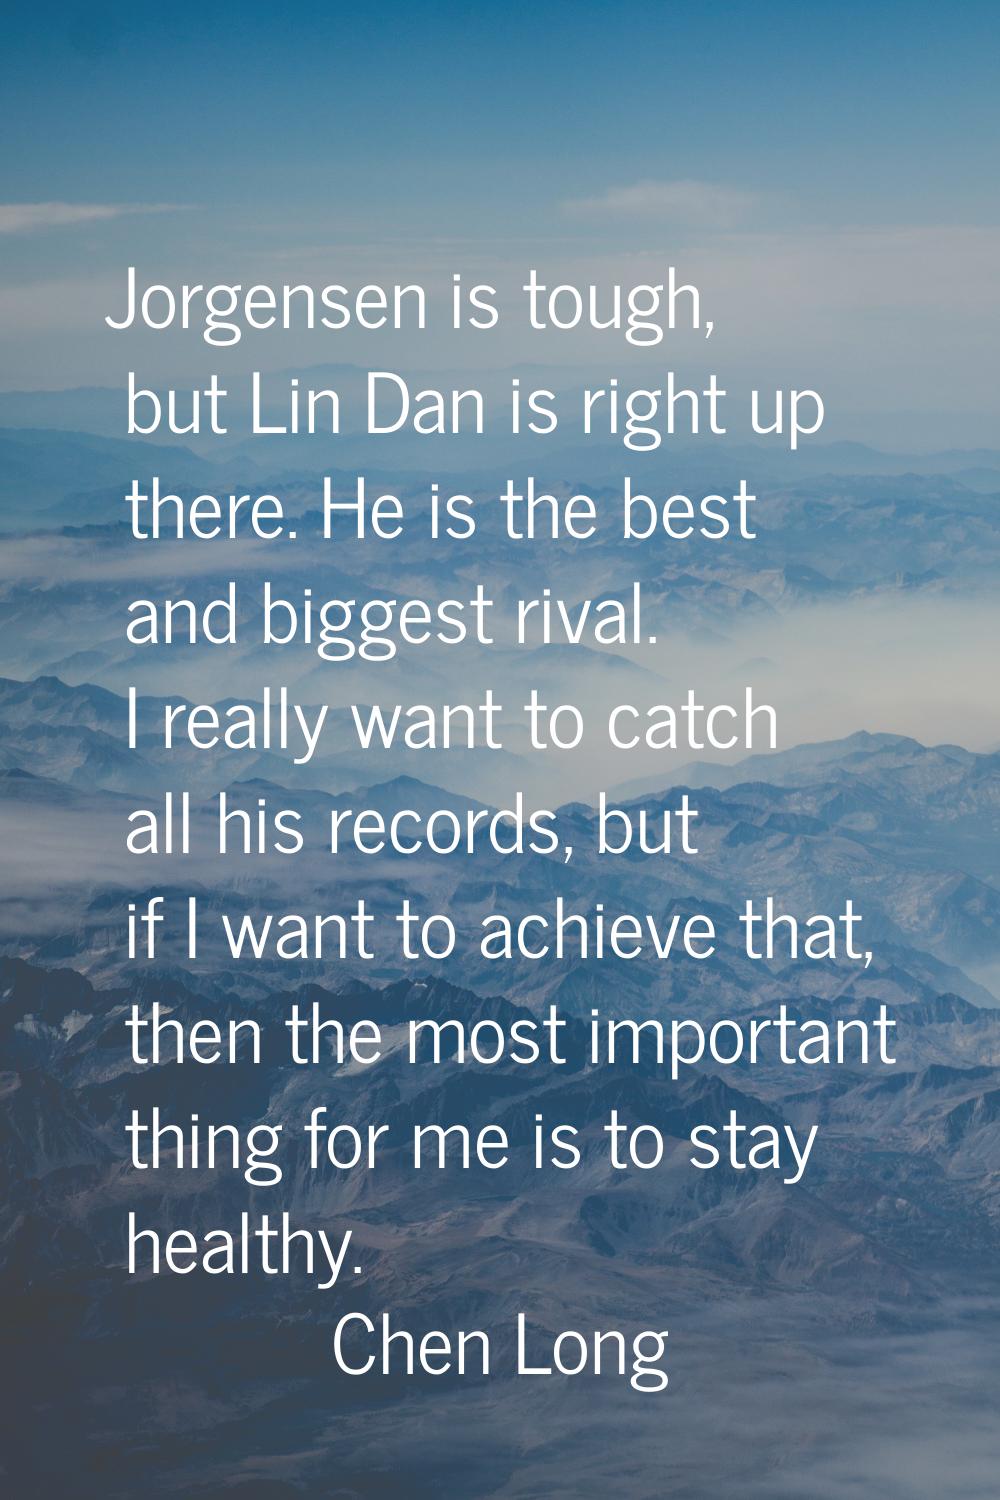 Jorgensen is tough, but Lin Dan is right up there. He is the best and biggest rival. I really want 